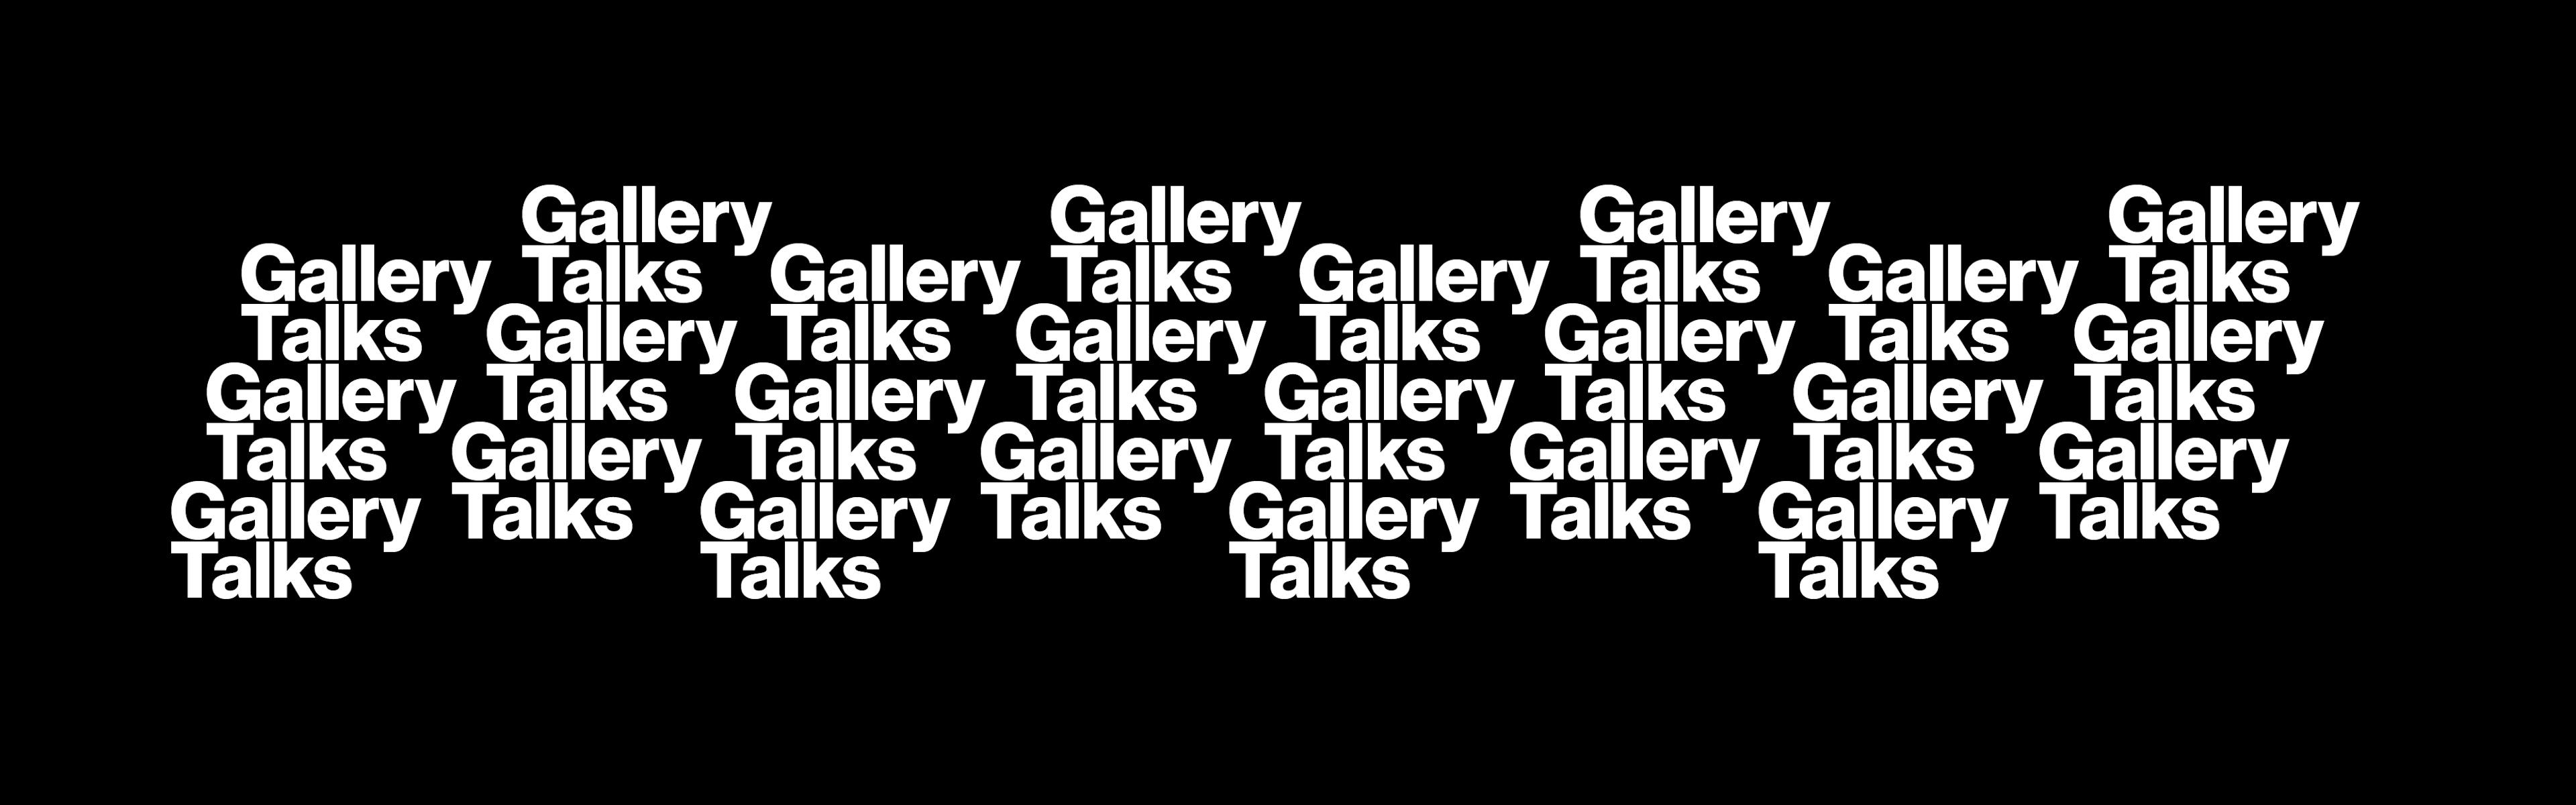 Repeated pattern of white text on a black background reading 'gallery talks' forming a graphic design.